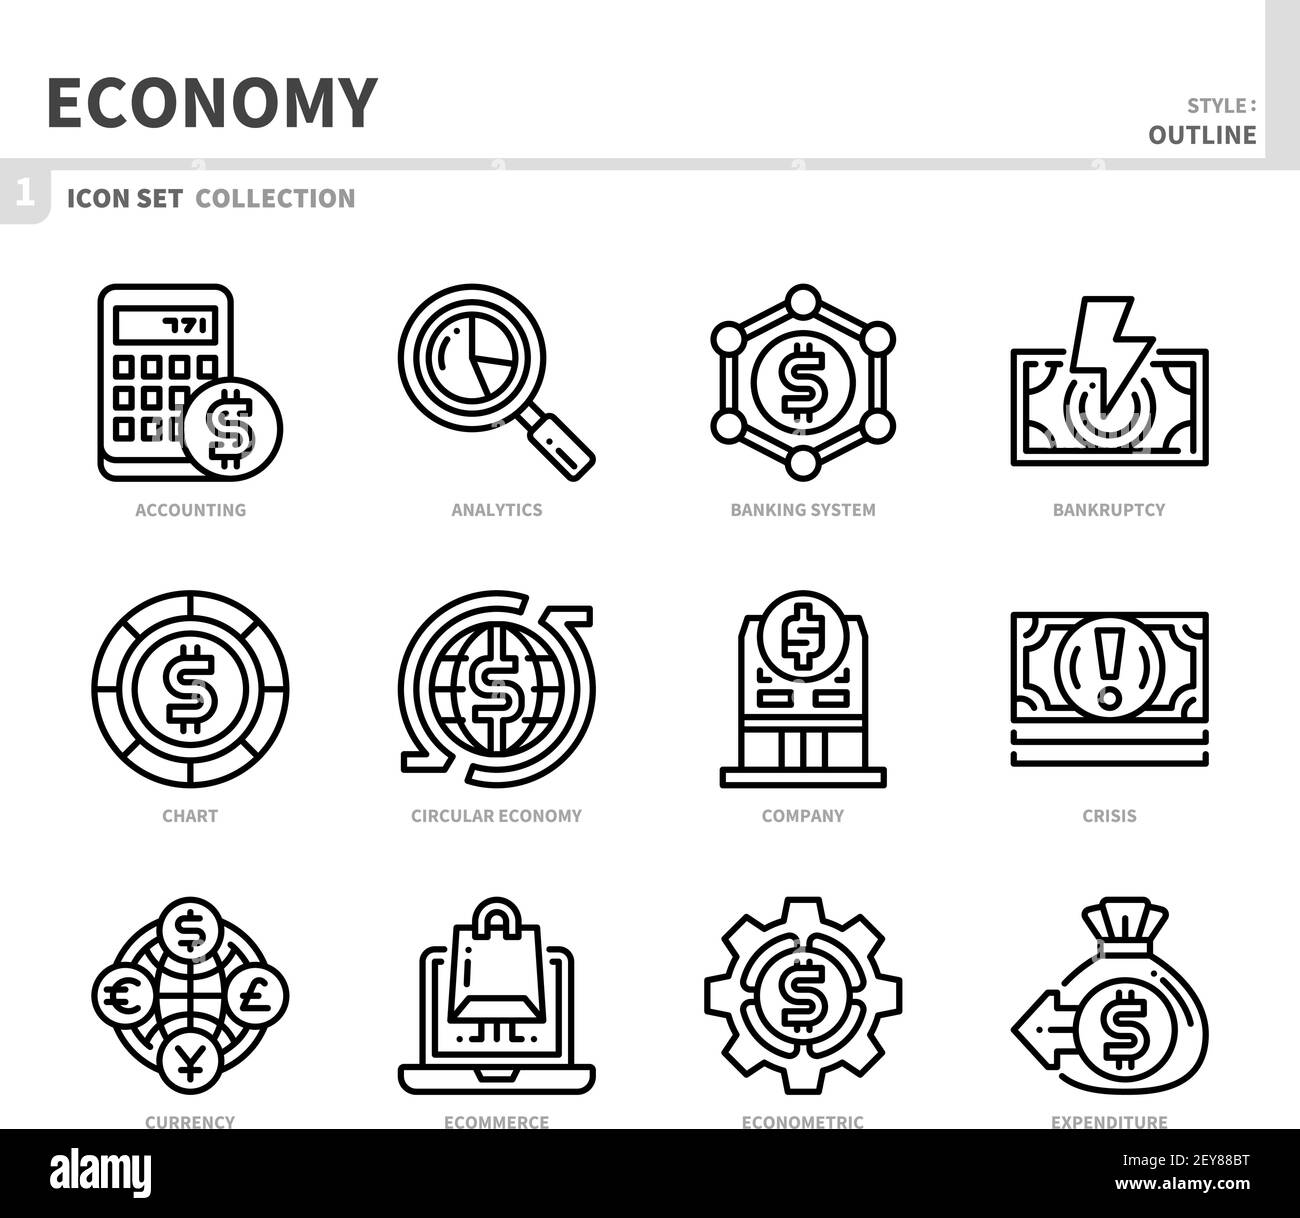 economy icon set,outline style,vector and illustration Stock Vector